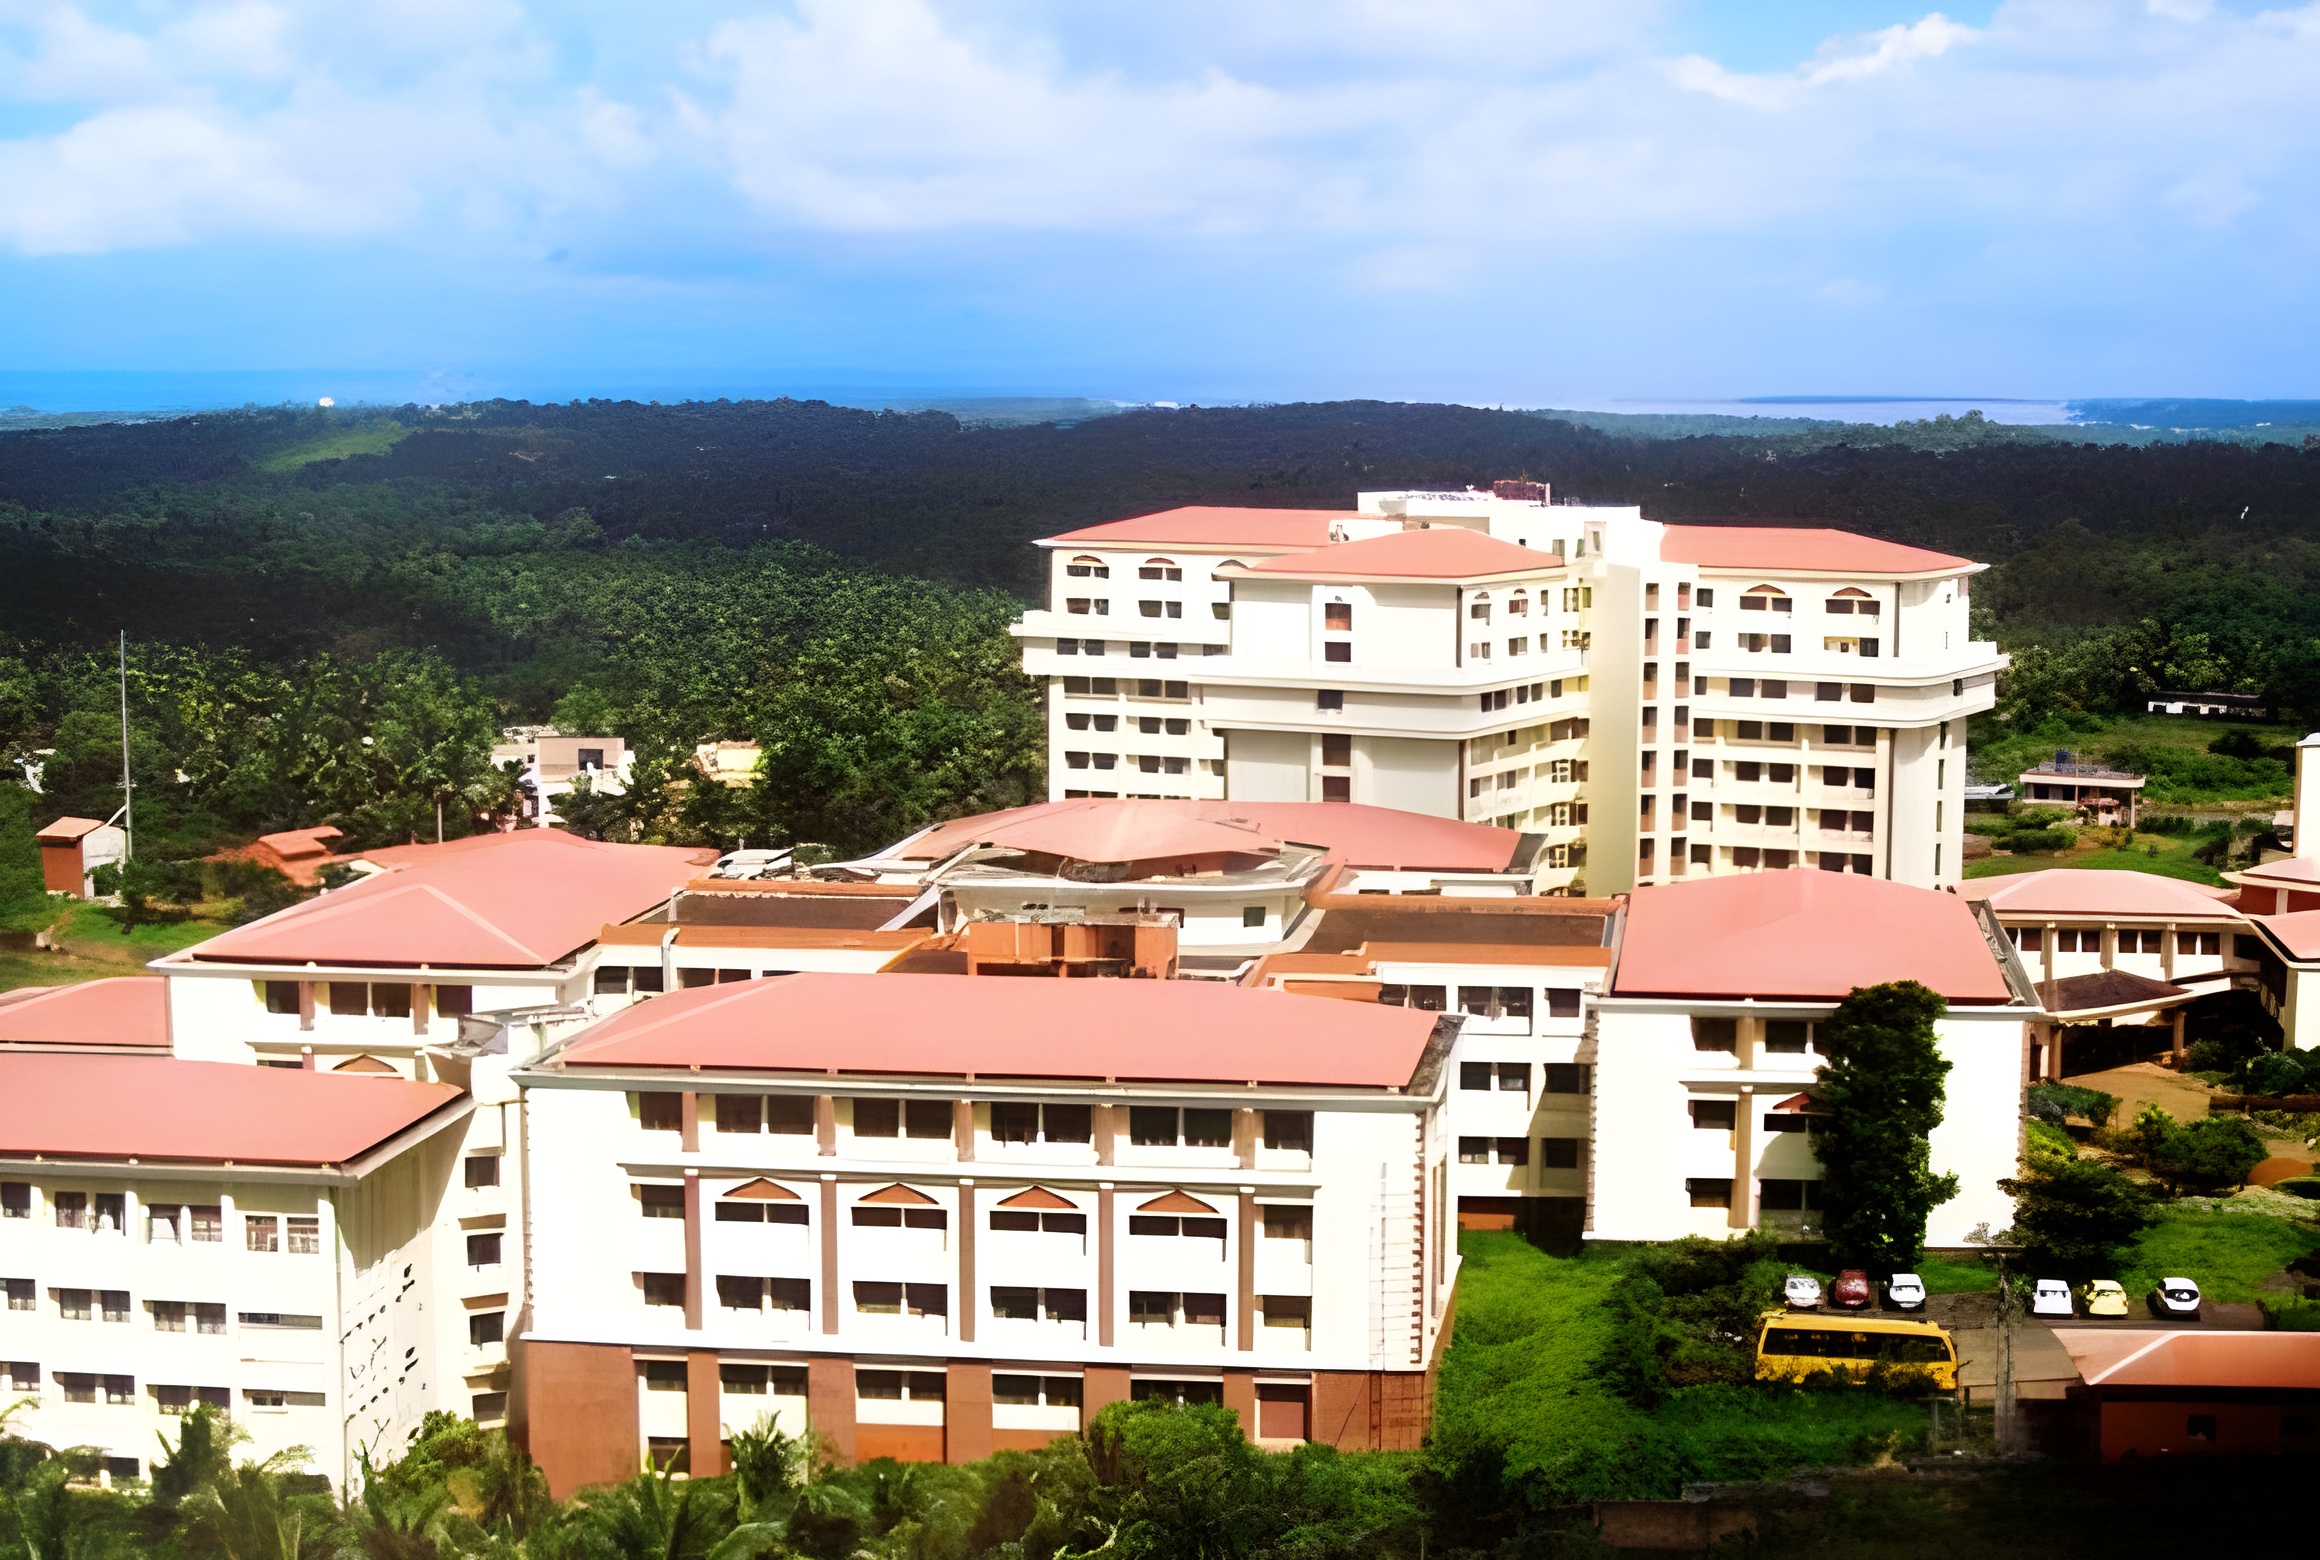 Yenepoya Medical College Mangalore Admission, Courses Offered, Fee Structure, Recognition, Facilities